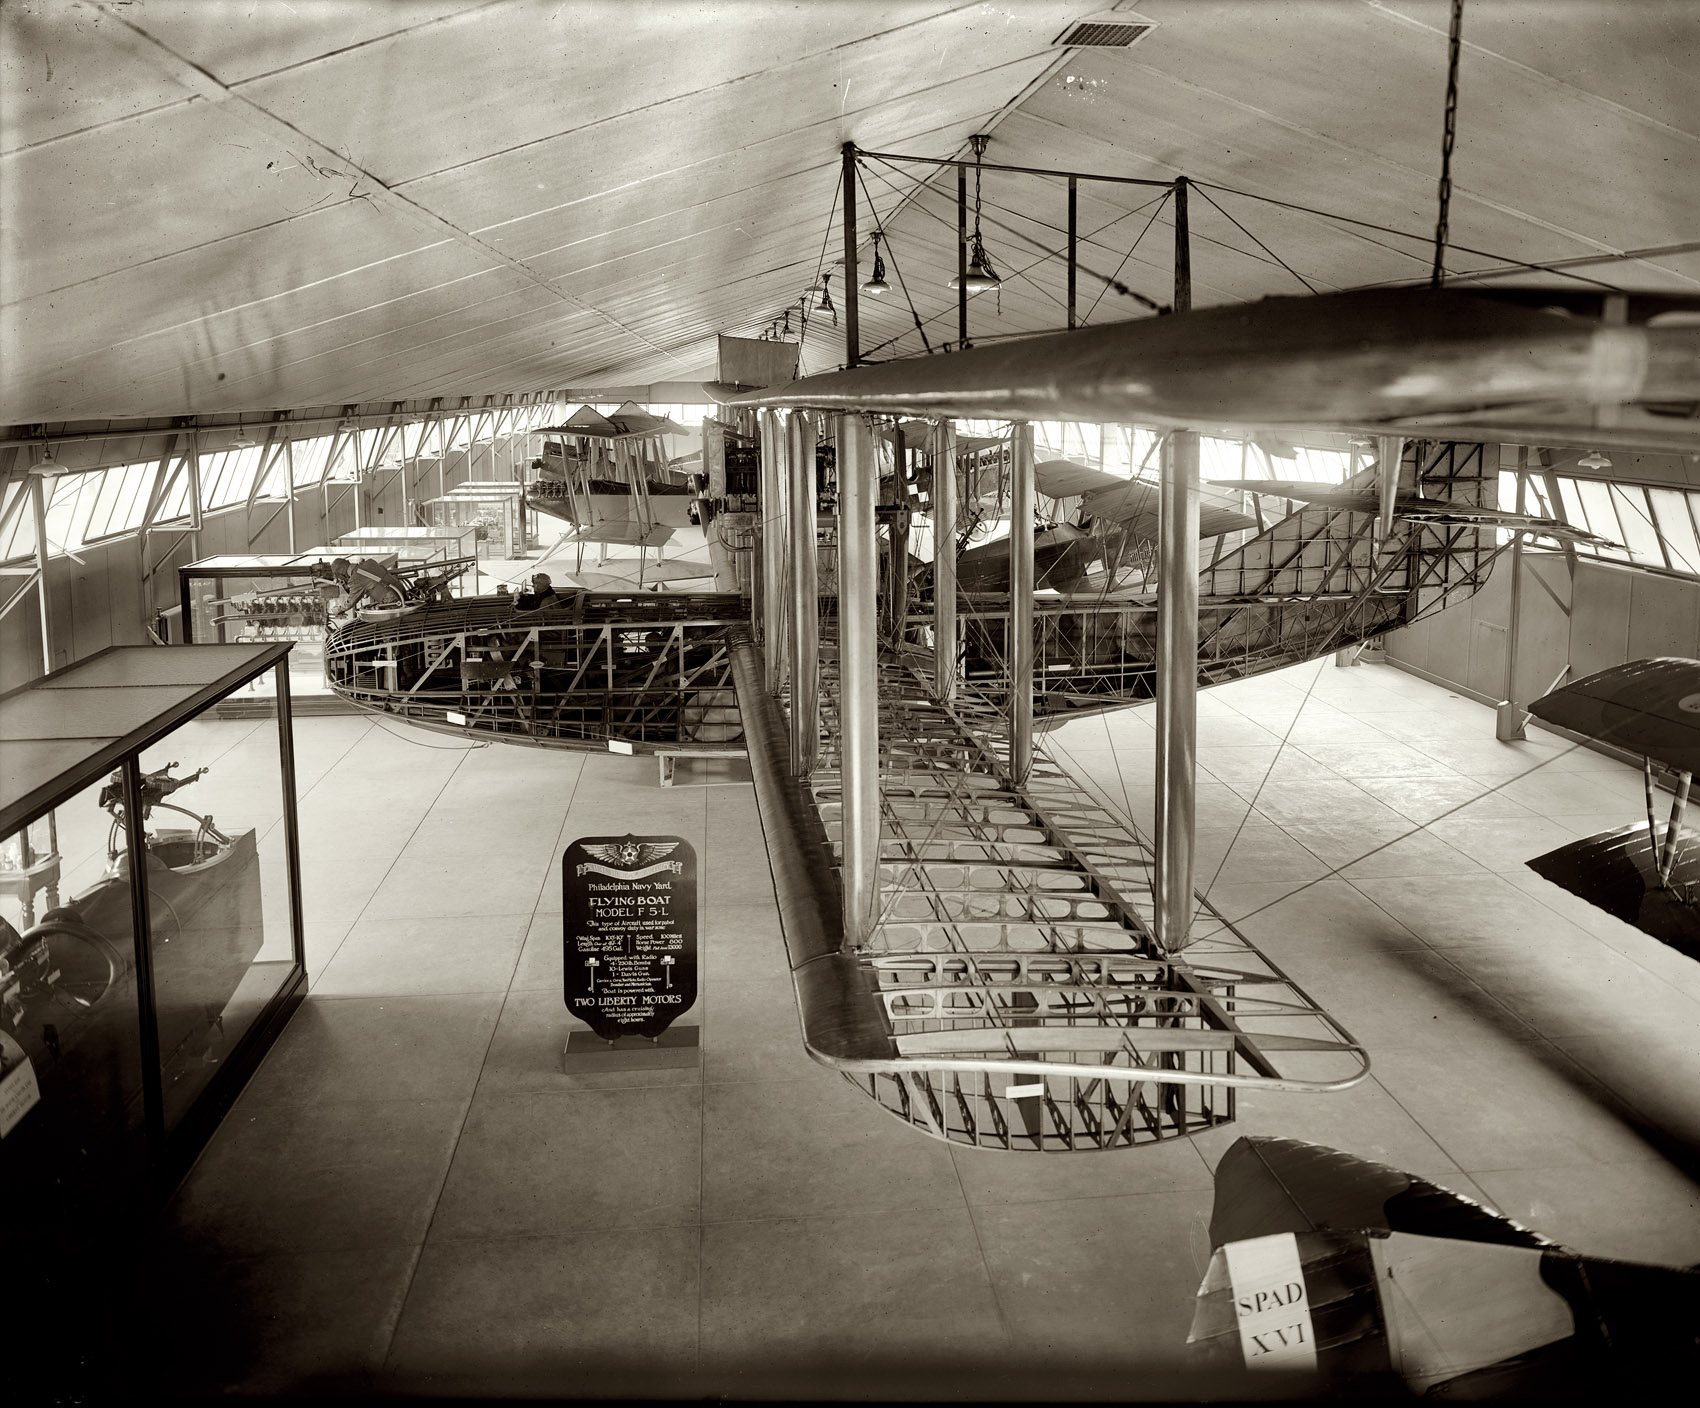 1921 or 1922. "Aeroplane exhibit, museum." For a closeup of the sign click here. National Photo Company Collection glass negative. View full size.